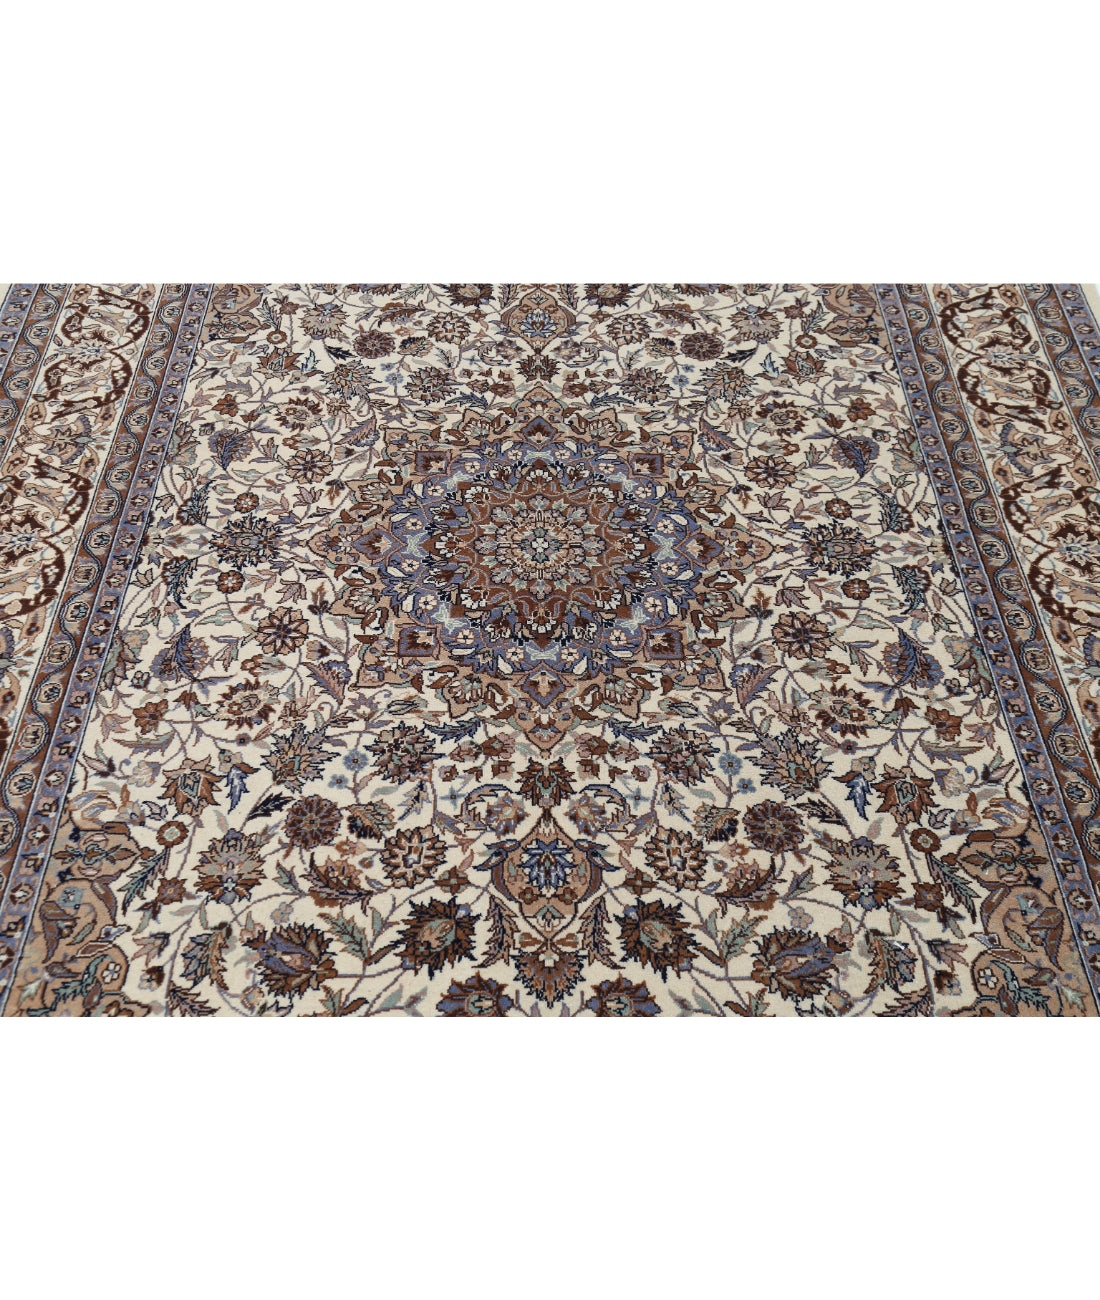 Hand Knotted Heritage Persian Style Wool Rug - 5'11'' x 9'0'' 5'11'' x 9'0'' (178 X 270) / Ivory / Taupe